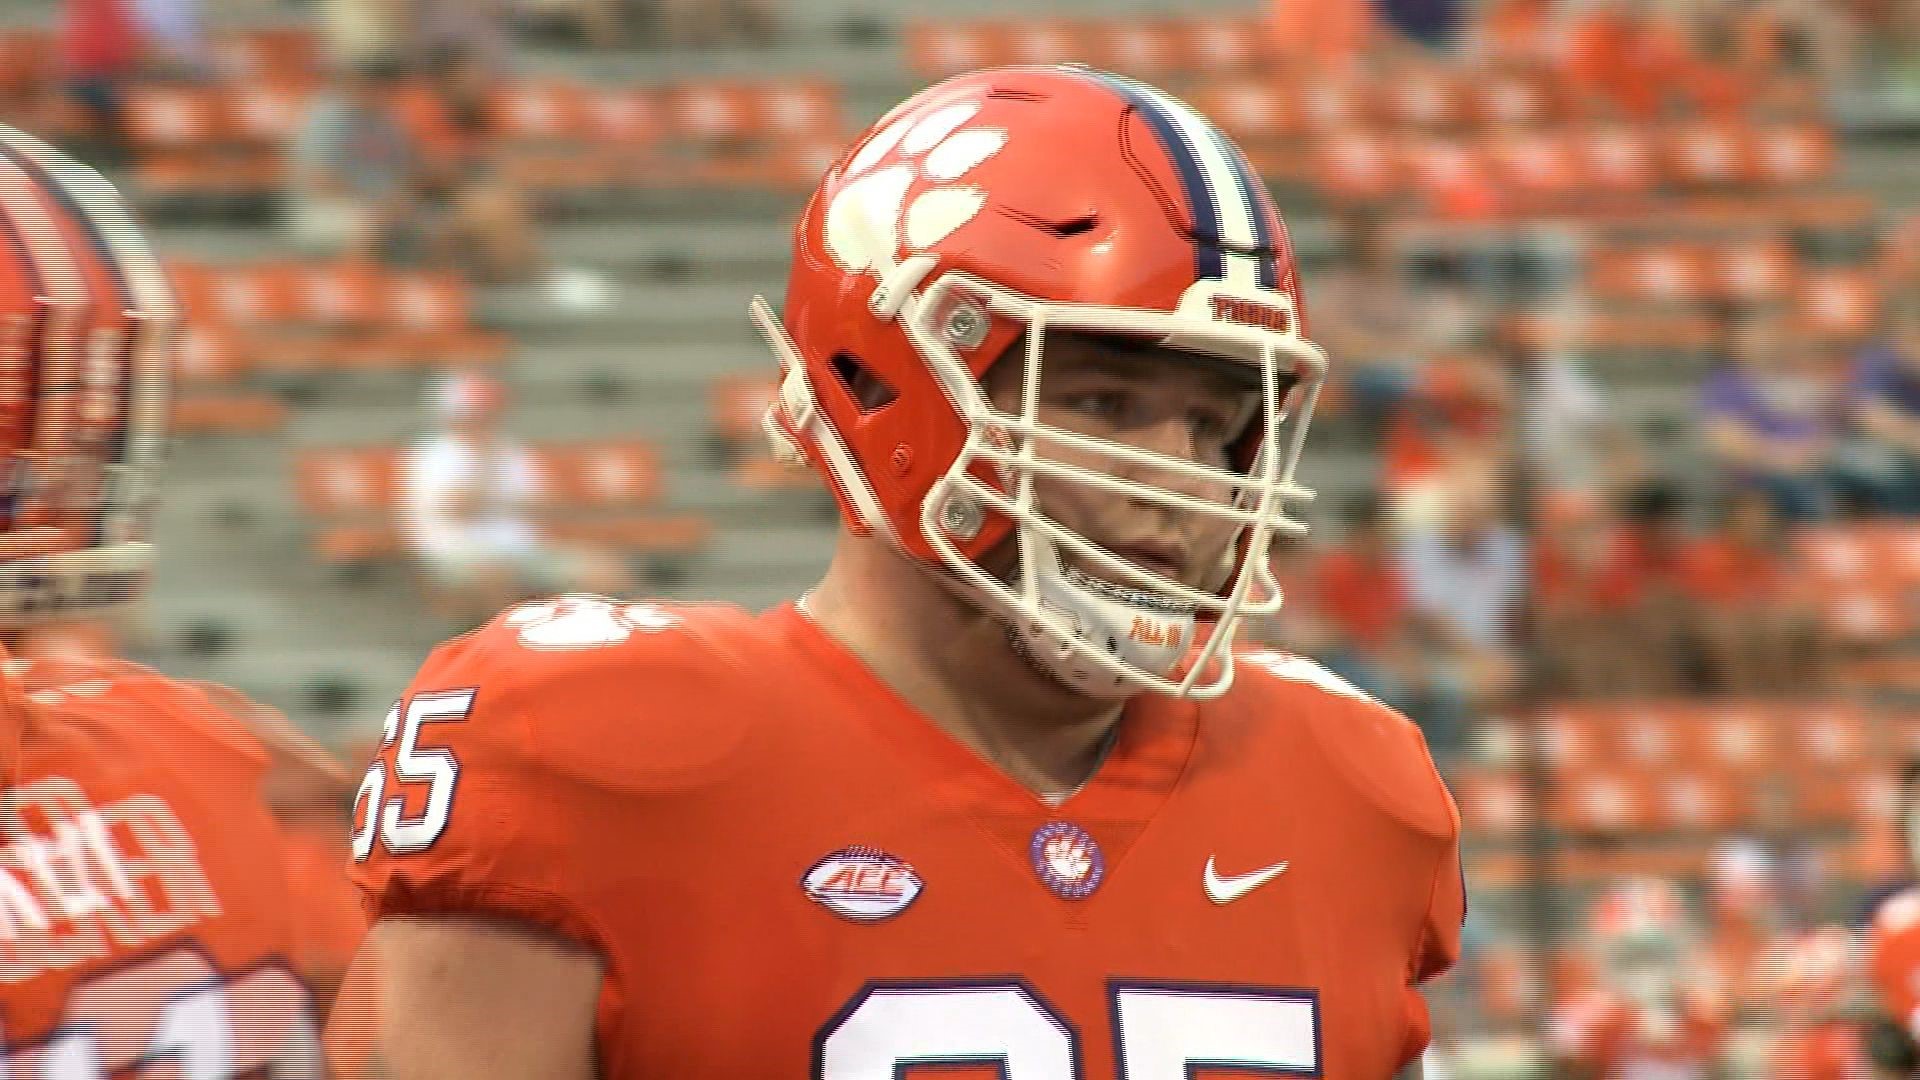 Bockhorst played over 1000 snaps during his career at Clemson.